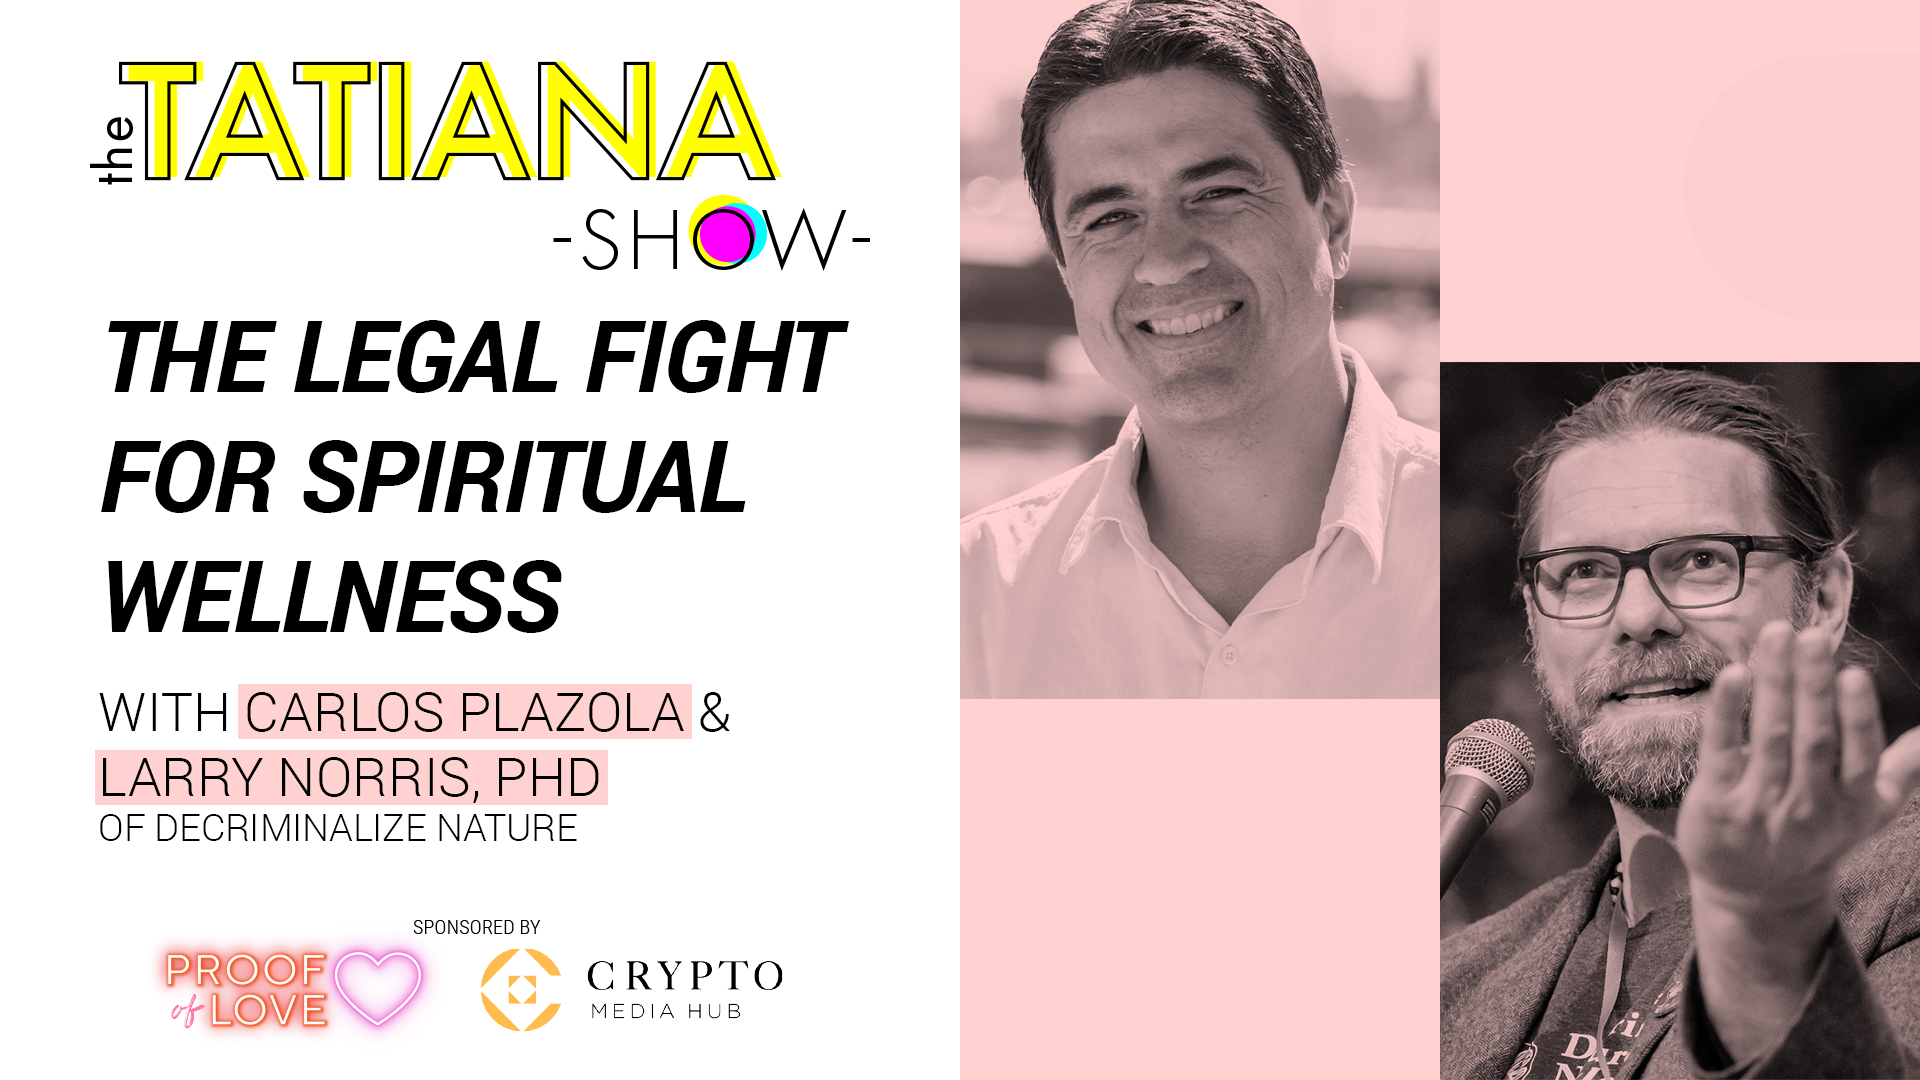 The Legal Fight for Spiritual Wellness with Carlos Plazola & Larry Norris, PhD of Decriminalize Nature